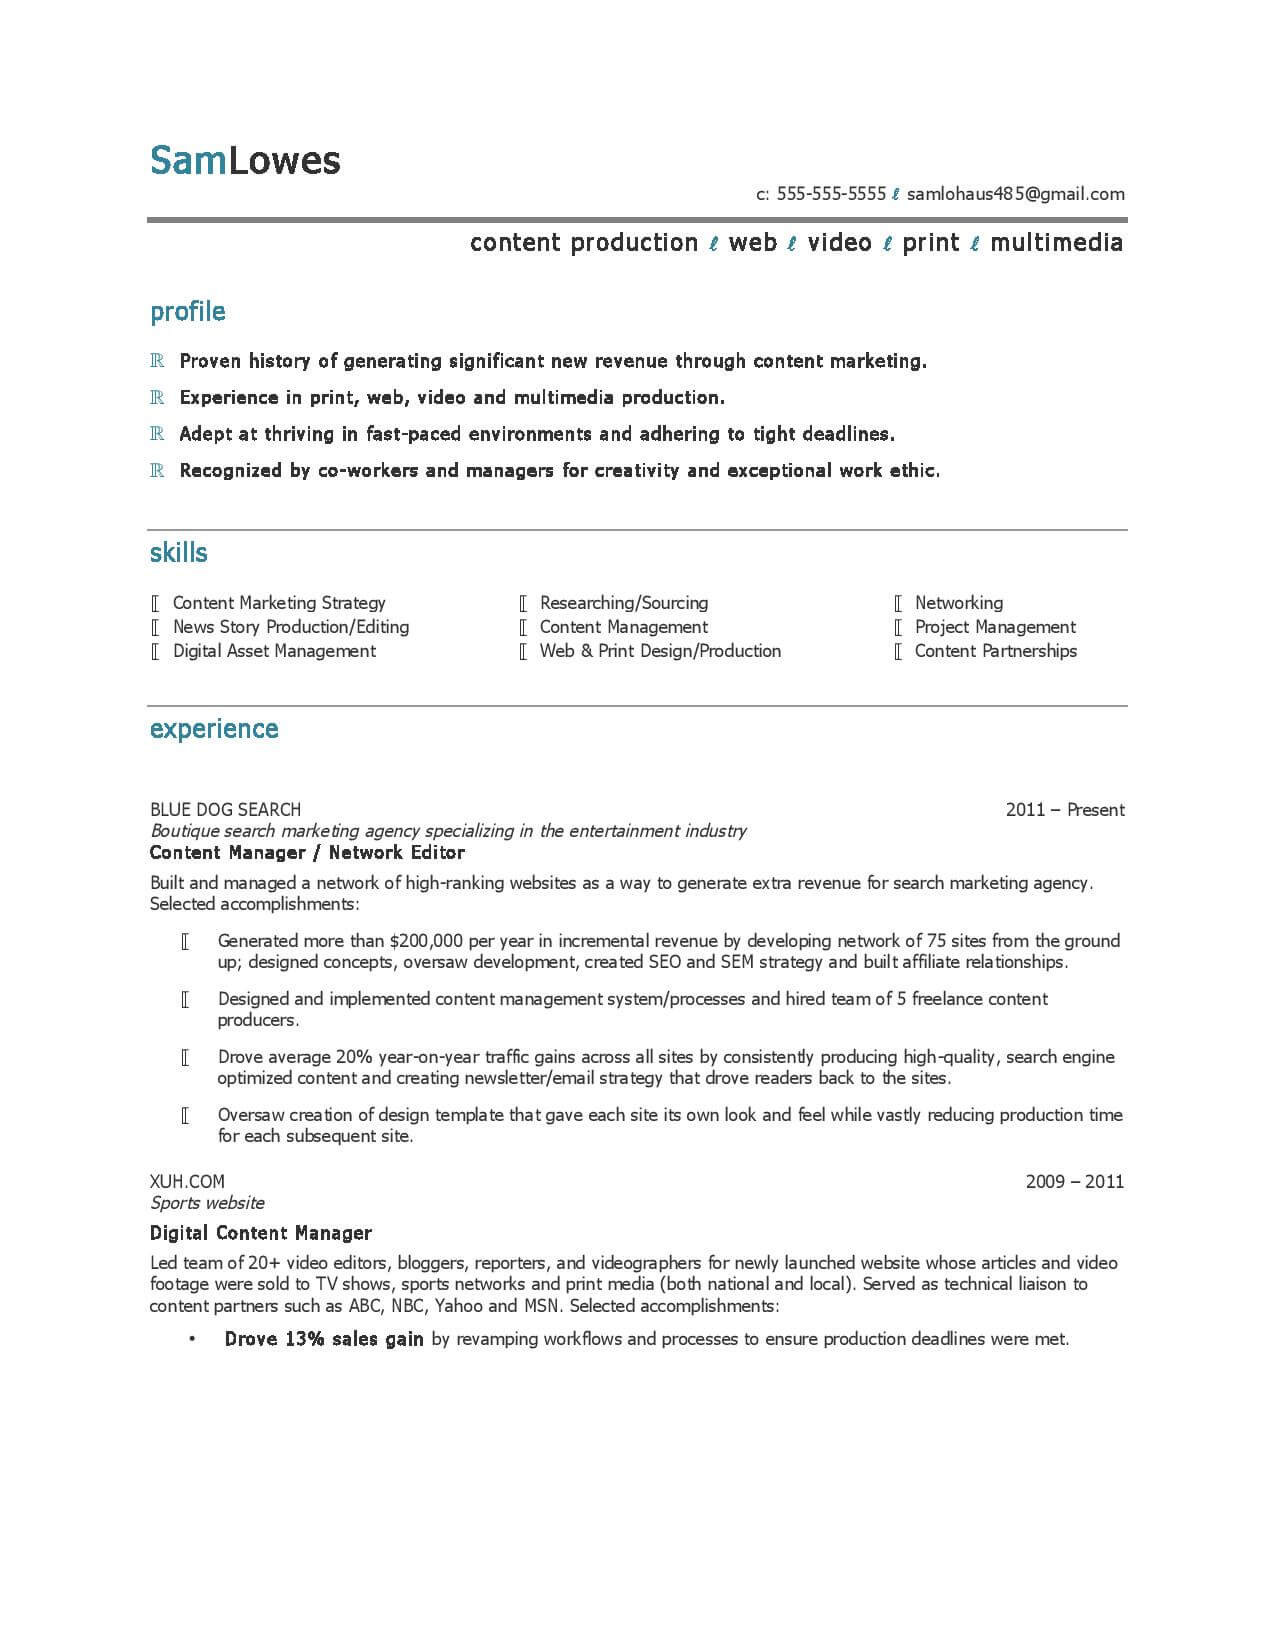 Sample Resume for Web Content Manager 10 Marketing Resume Samples Hiring Managers Will Notice